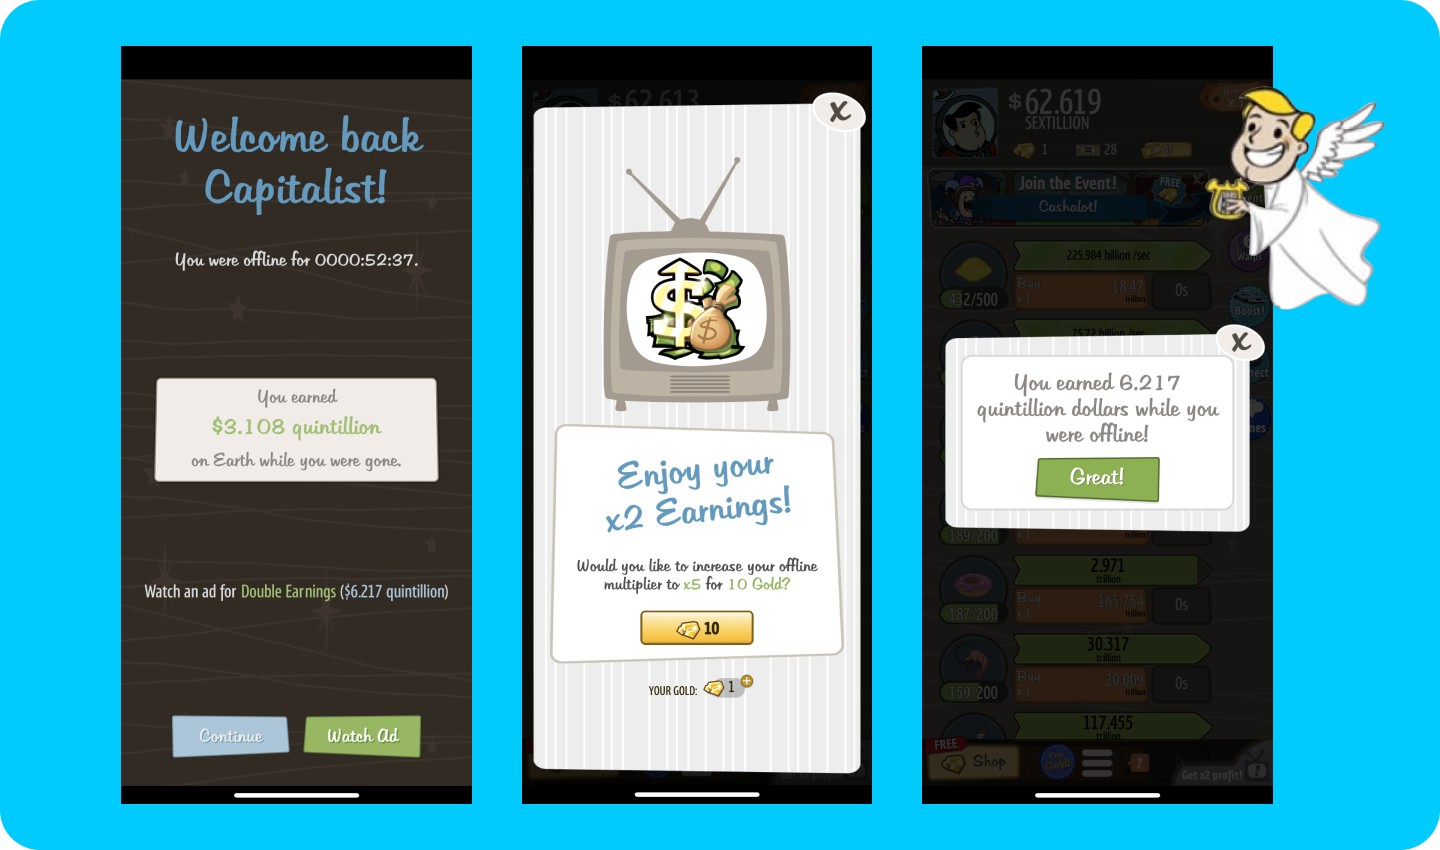 Video advertising and banner ads in mobile games